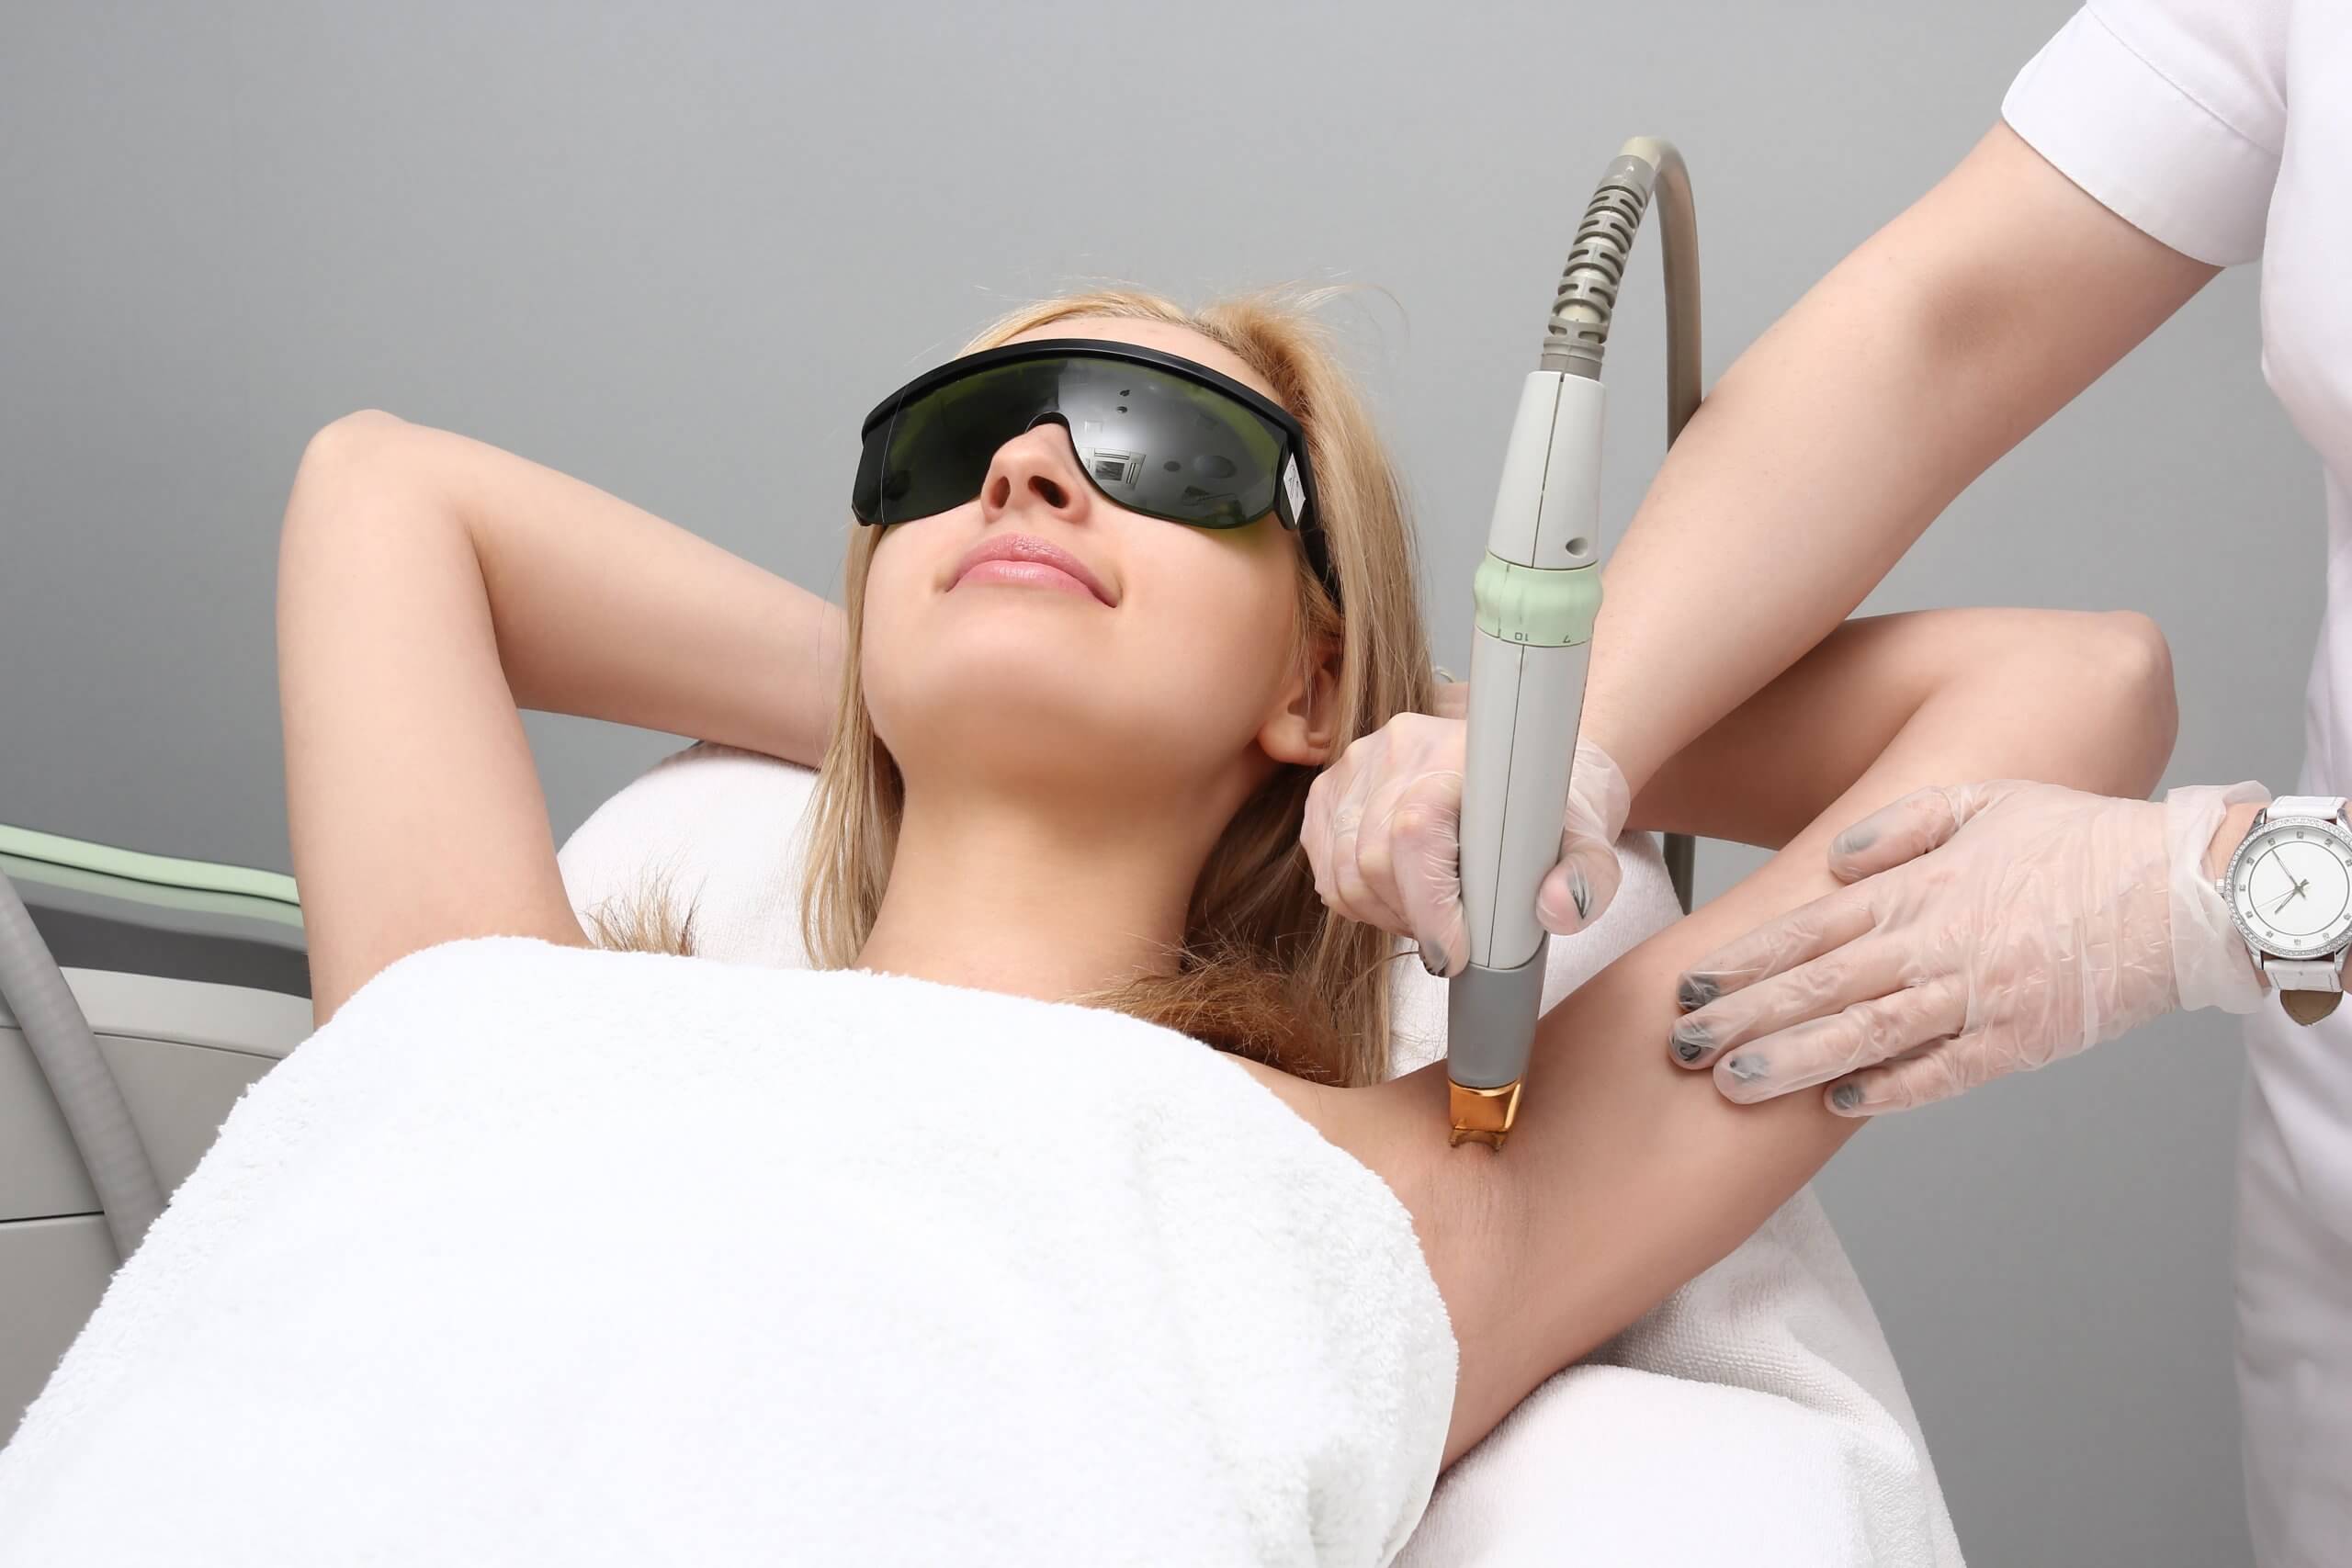 hair removal cosmetic laser technician performing treatment on a woman's underarms.